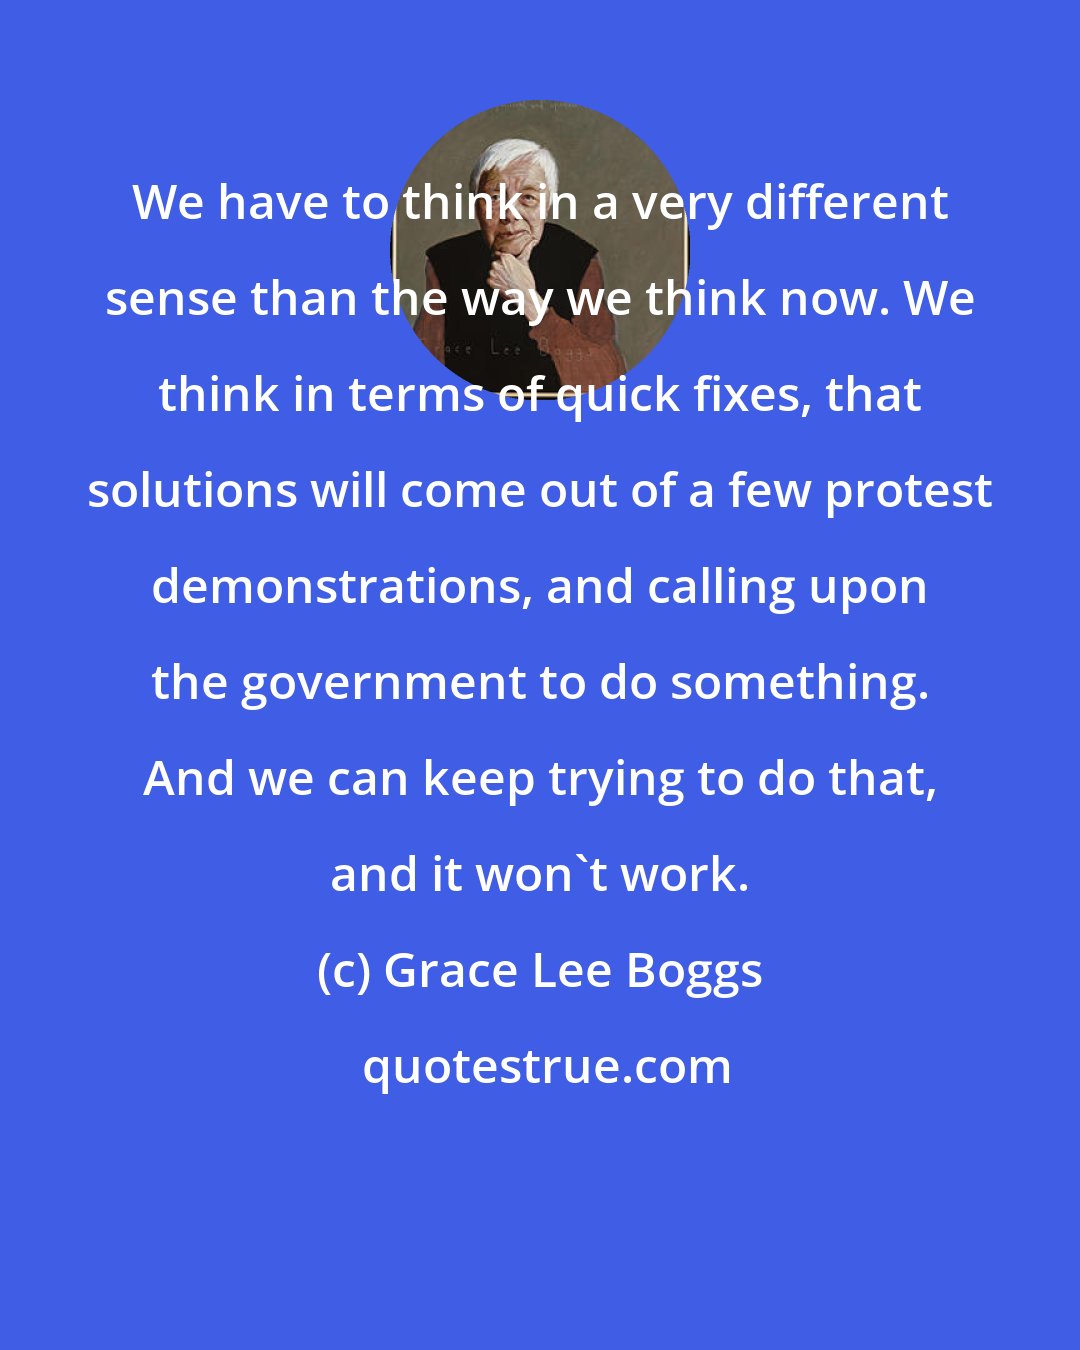 Grace Lee Boggs: We have to think in a very different sense than the way we think now. We think in terms of quick fixes, that solutions will come out of a few protest demonstrations, and calling upon the government to do something. And we can keep trying to do that, and it won't work.